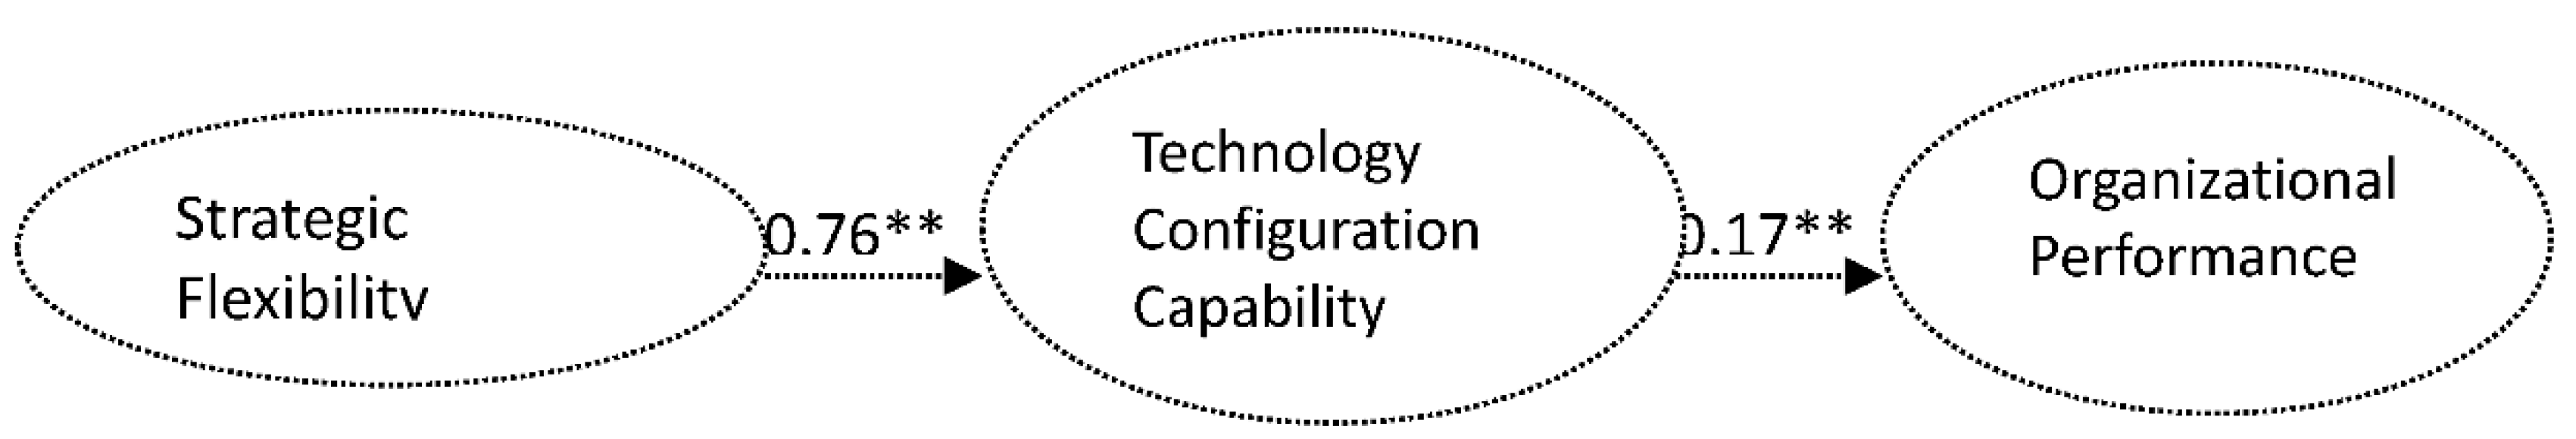 Sustainability | Free Full-Text | Technological Configuration Capability,  Strategic Flexibility, and Organizational Performance in Chinese High-Tech  Organizations